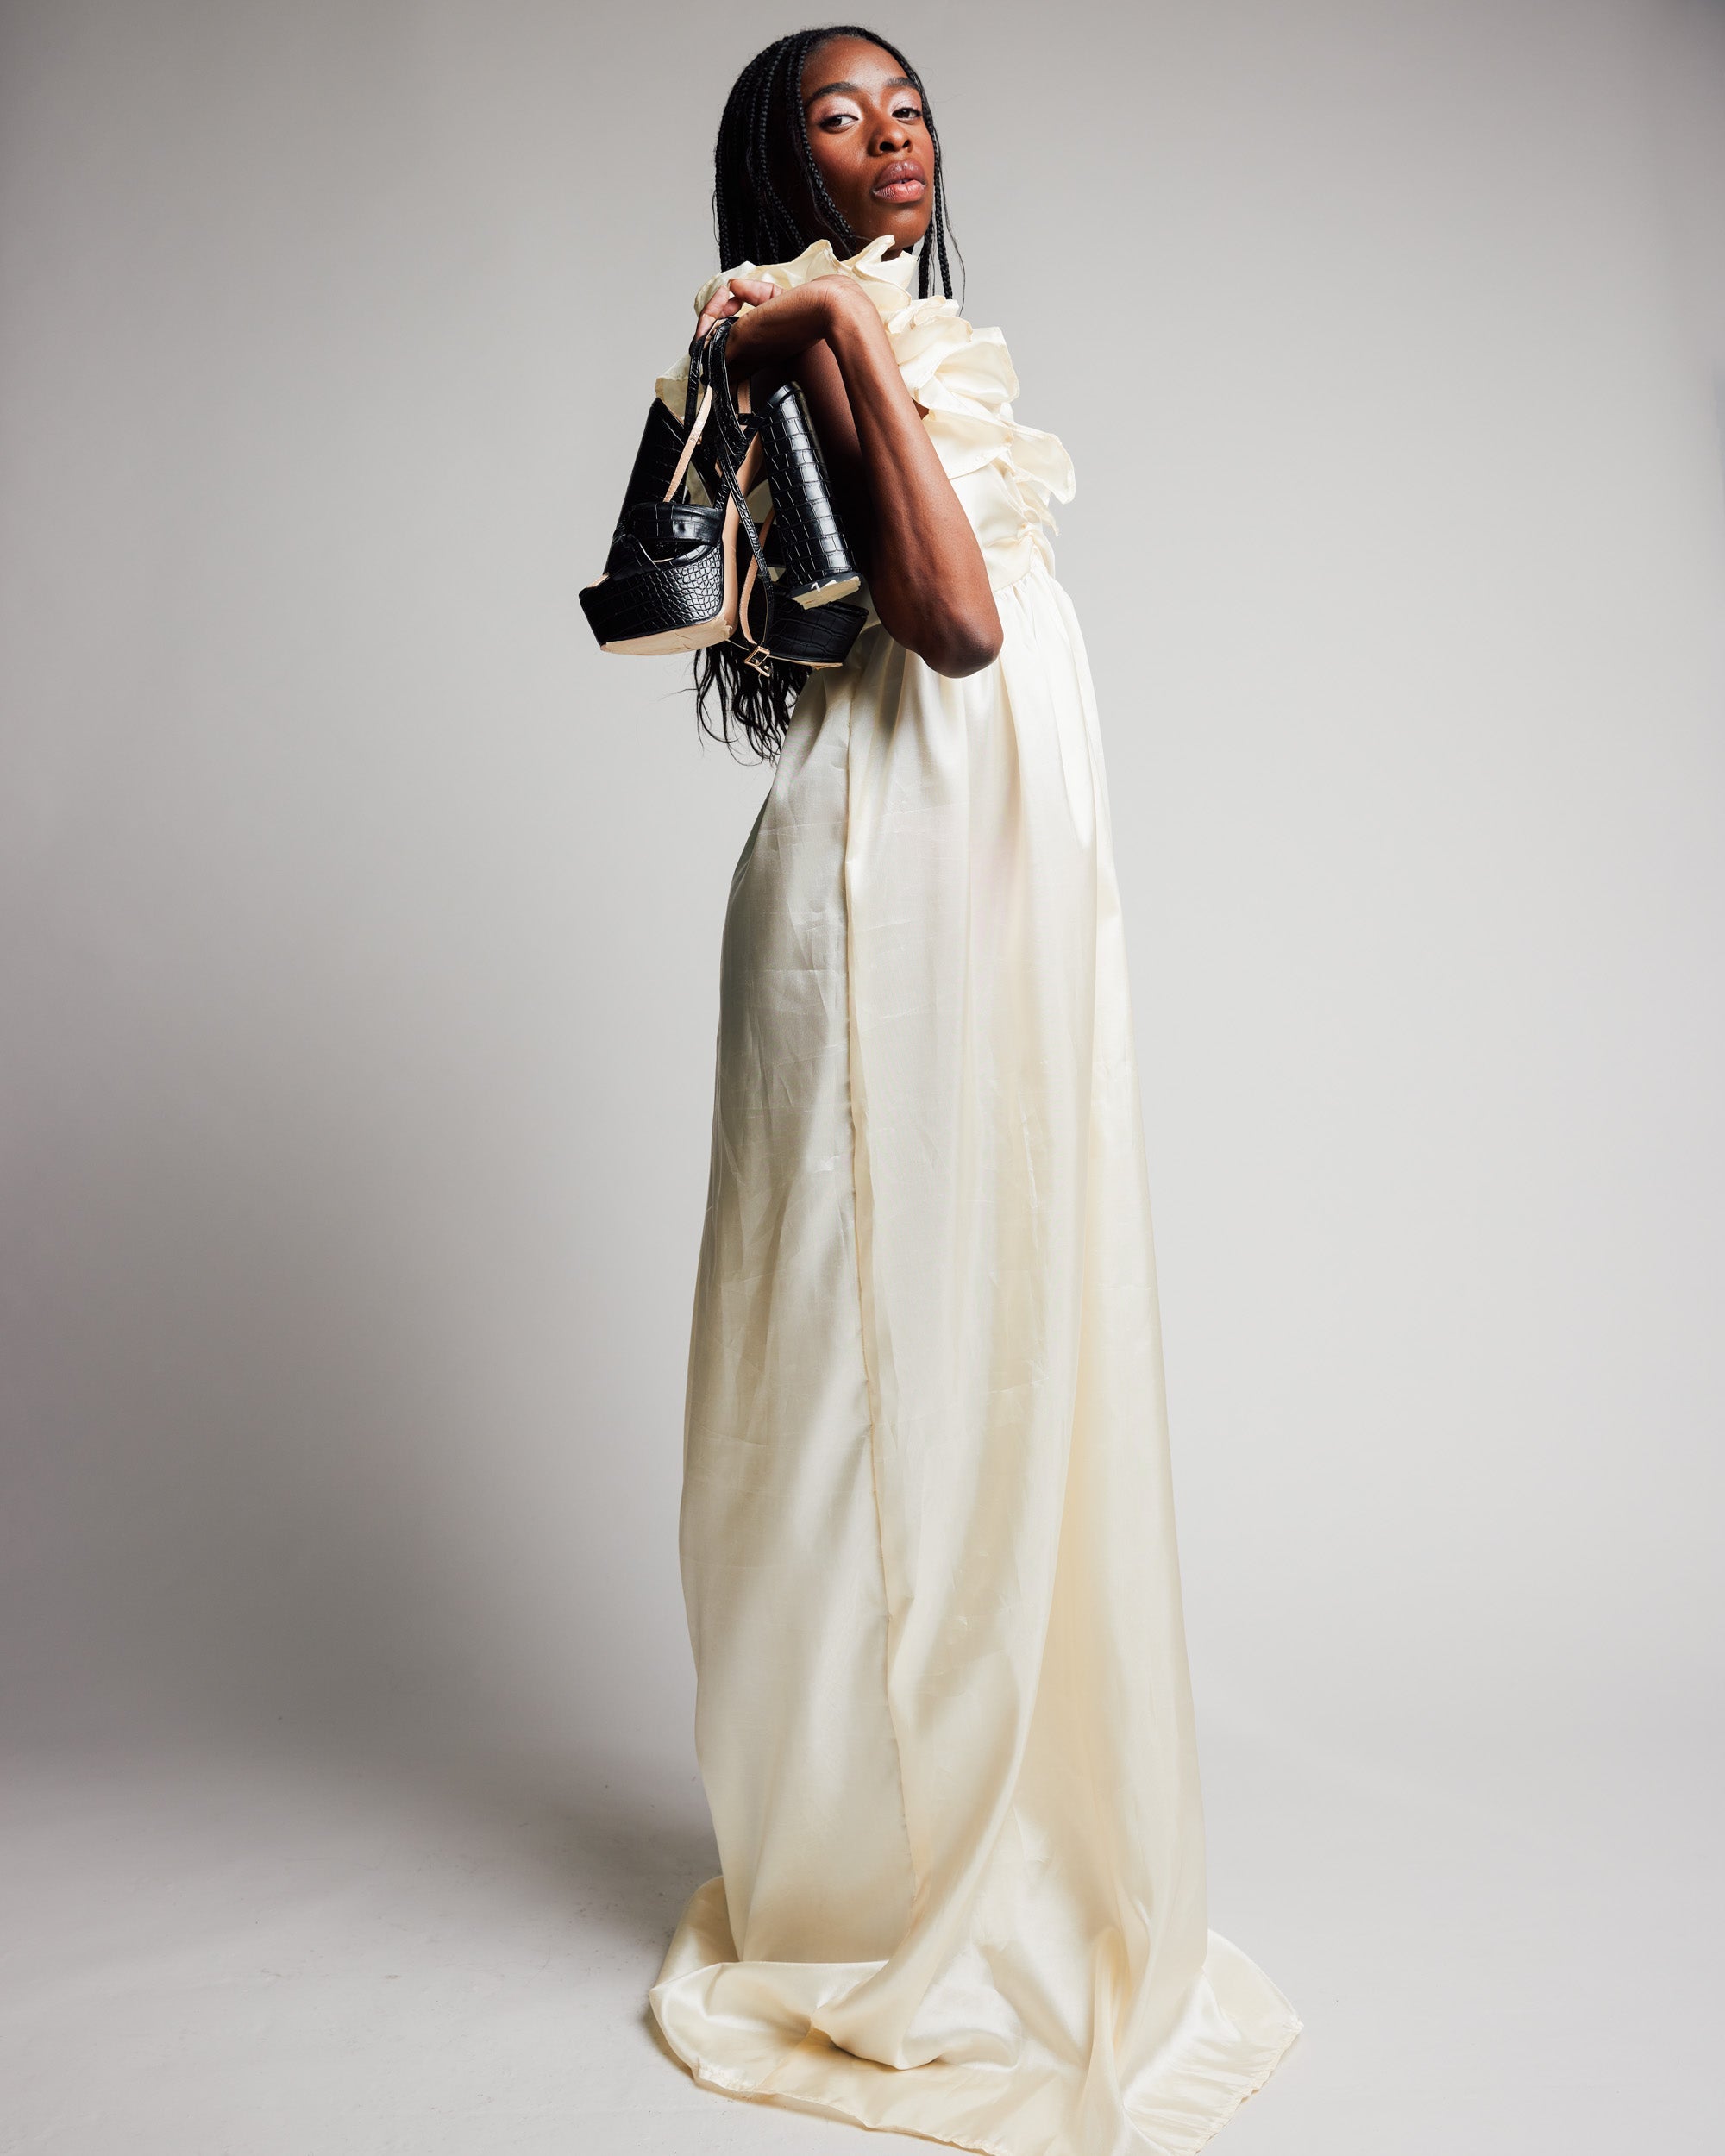 Cream Taffeta Gown with Juliette Sleeves by Madeline Marie